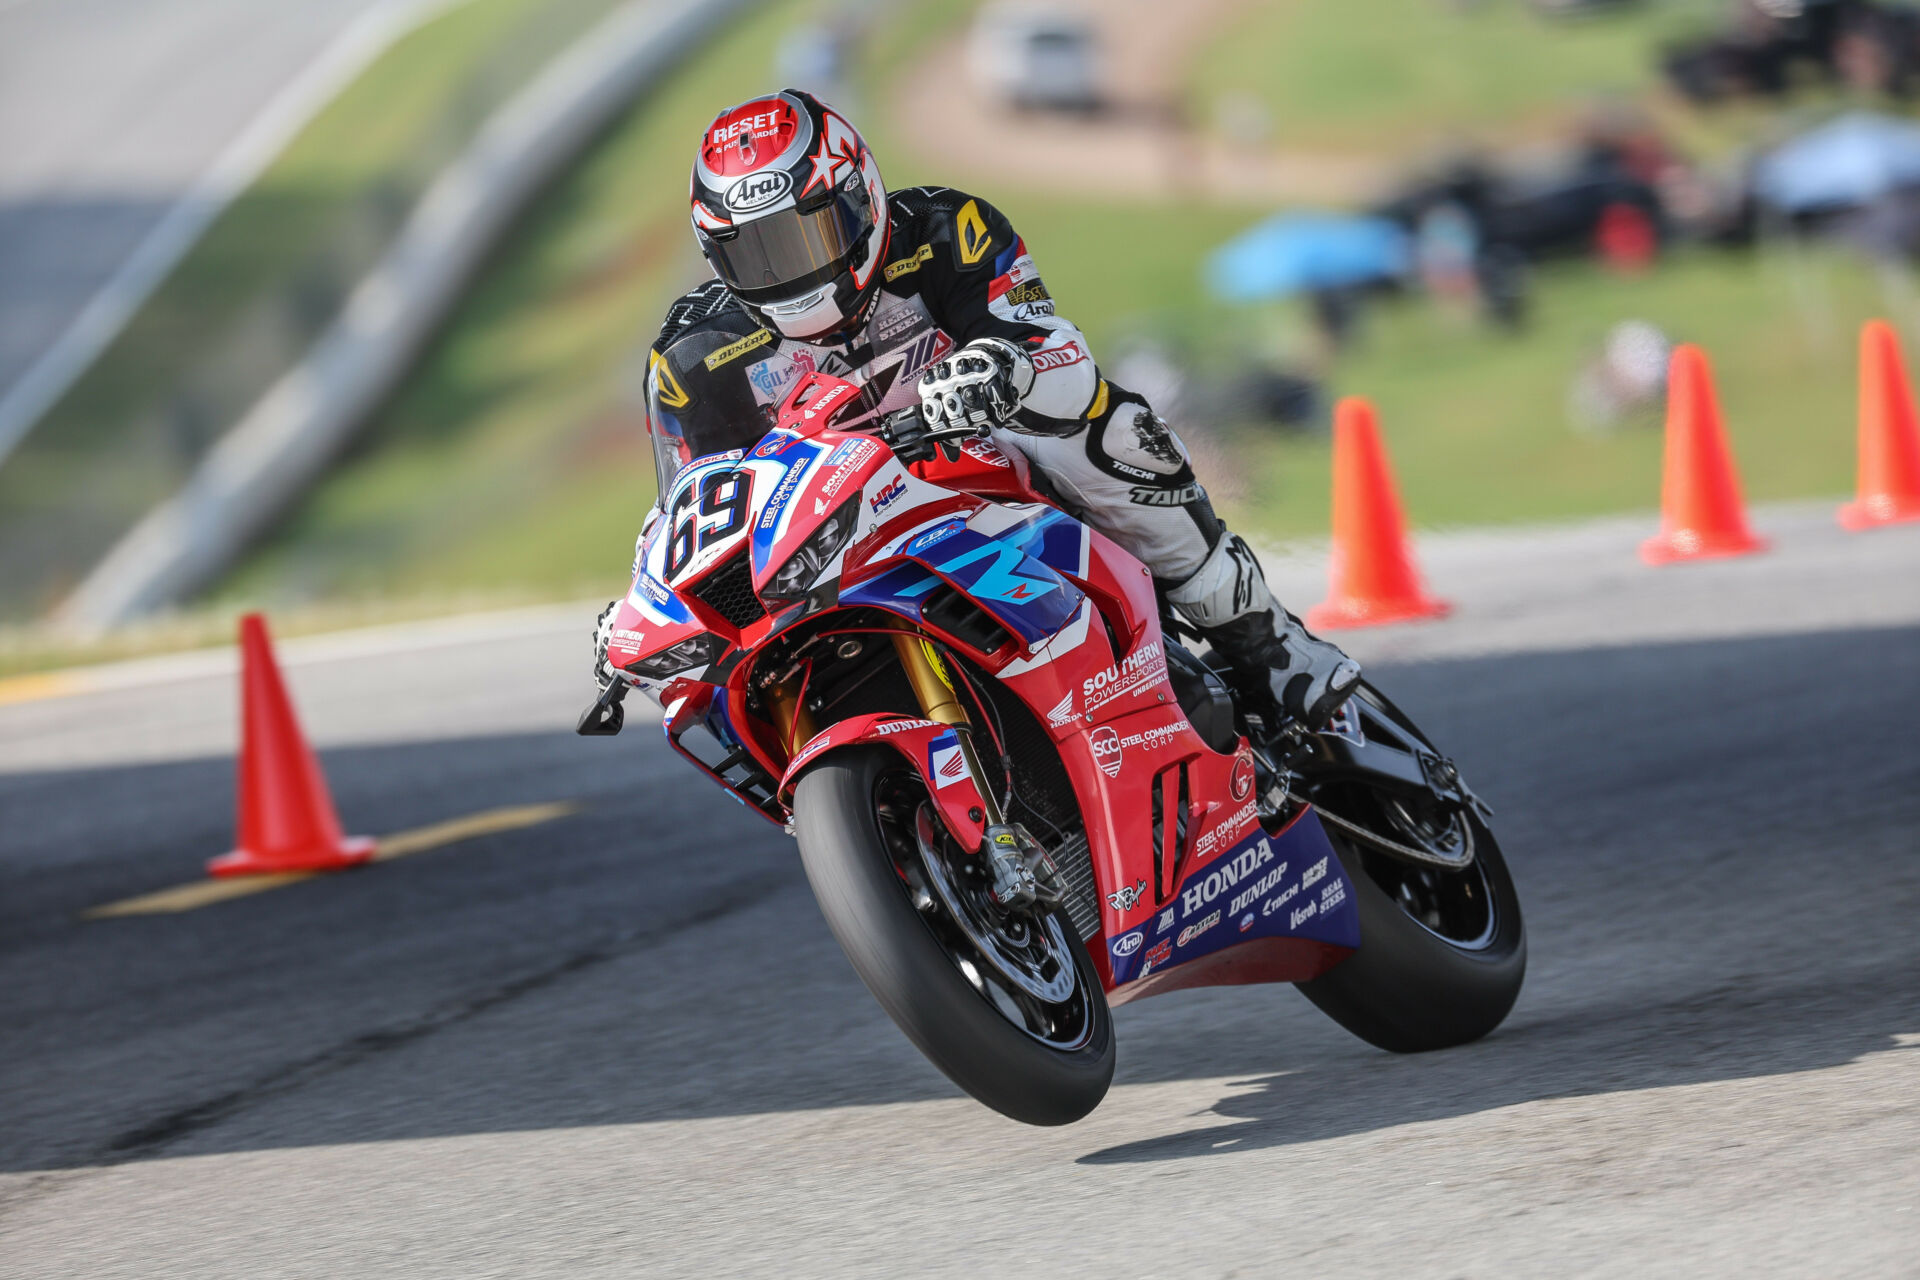 Hayden Gillim will begin defense of his 2023 MotoAmerica Stock 1000 Championship when the series gets started at Barber Motorsports Park, May 17-19. Photo by Brian J. Nelson, courtesy MotoAmerica.